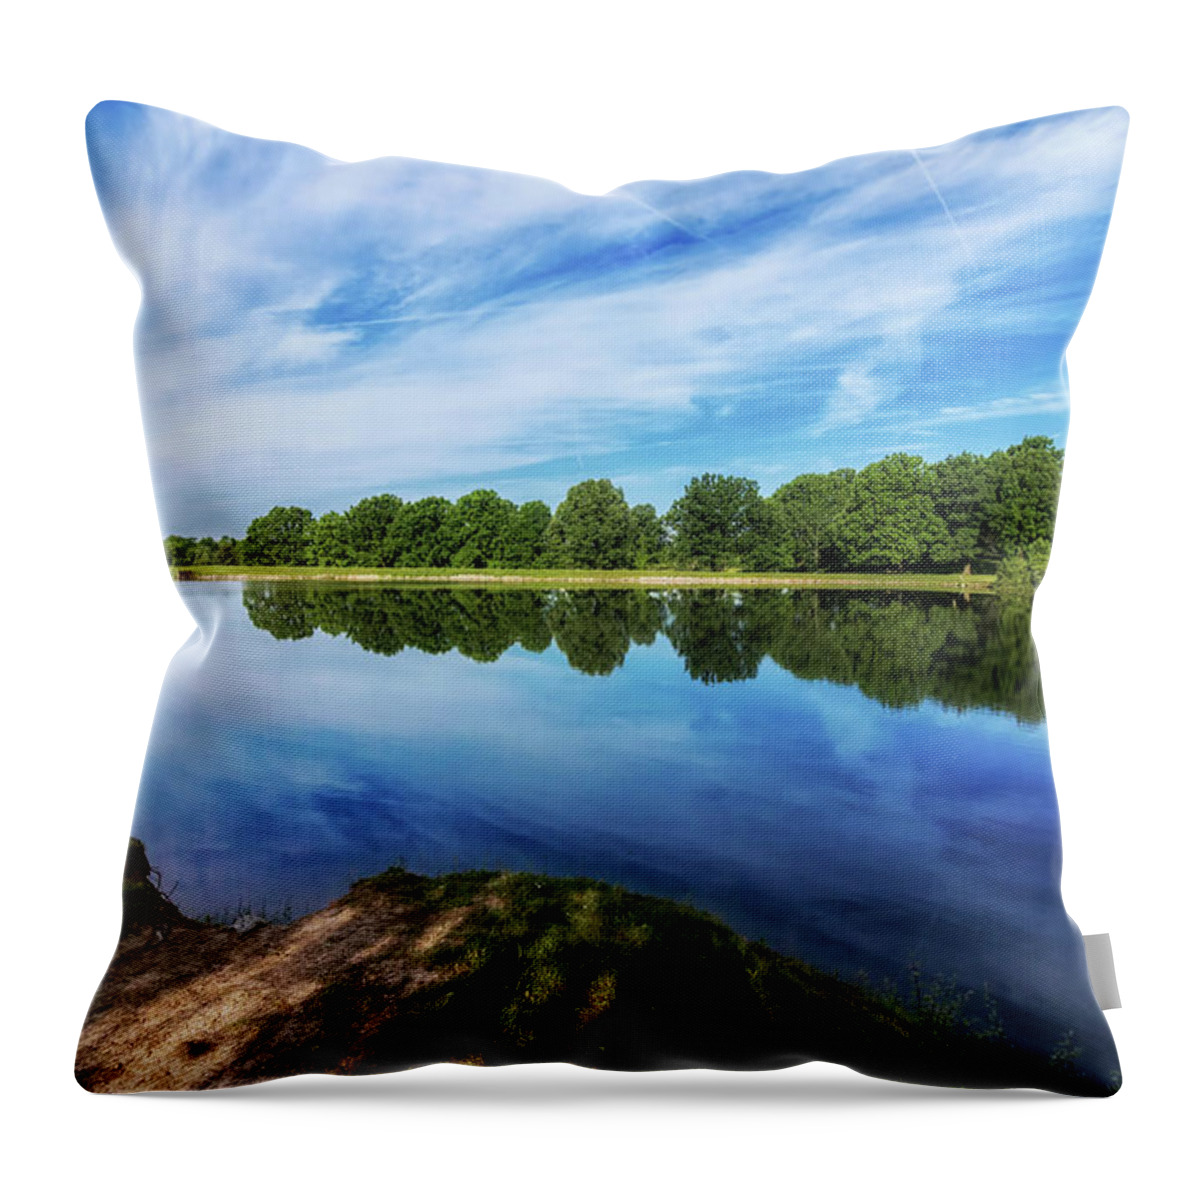 Angle Throw Pillow featuring the photograph Lake View by Tom Mc Nemar